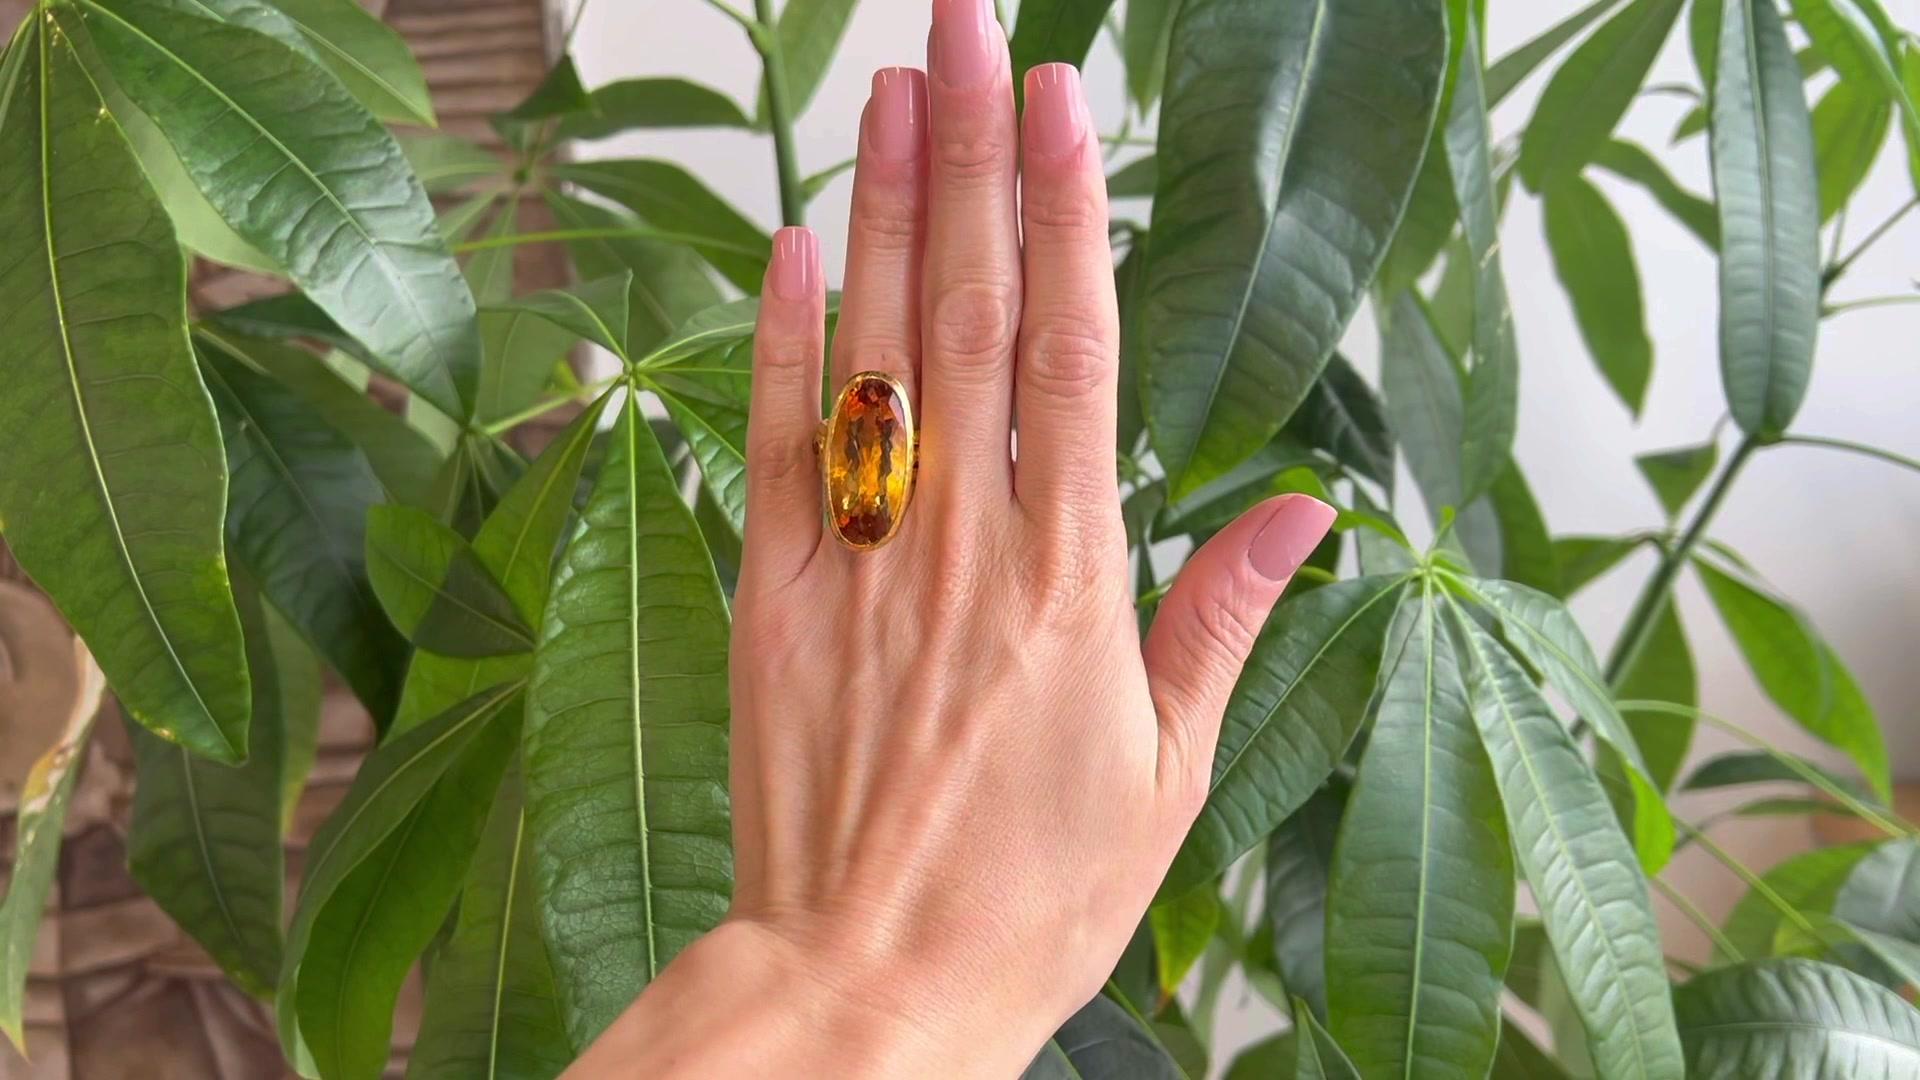 One ARA 21.15 Carat Citrine 24 Karat Yellow Gold Cocktail Ring. Featuring one oval faceted golden citrine weighing approximately 21.15 carats. Accented by 11 round brilliant cut golden citrine with a total weight of approximately 1.00 carat. Crafted